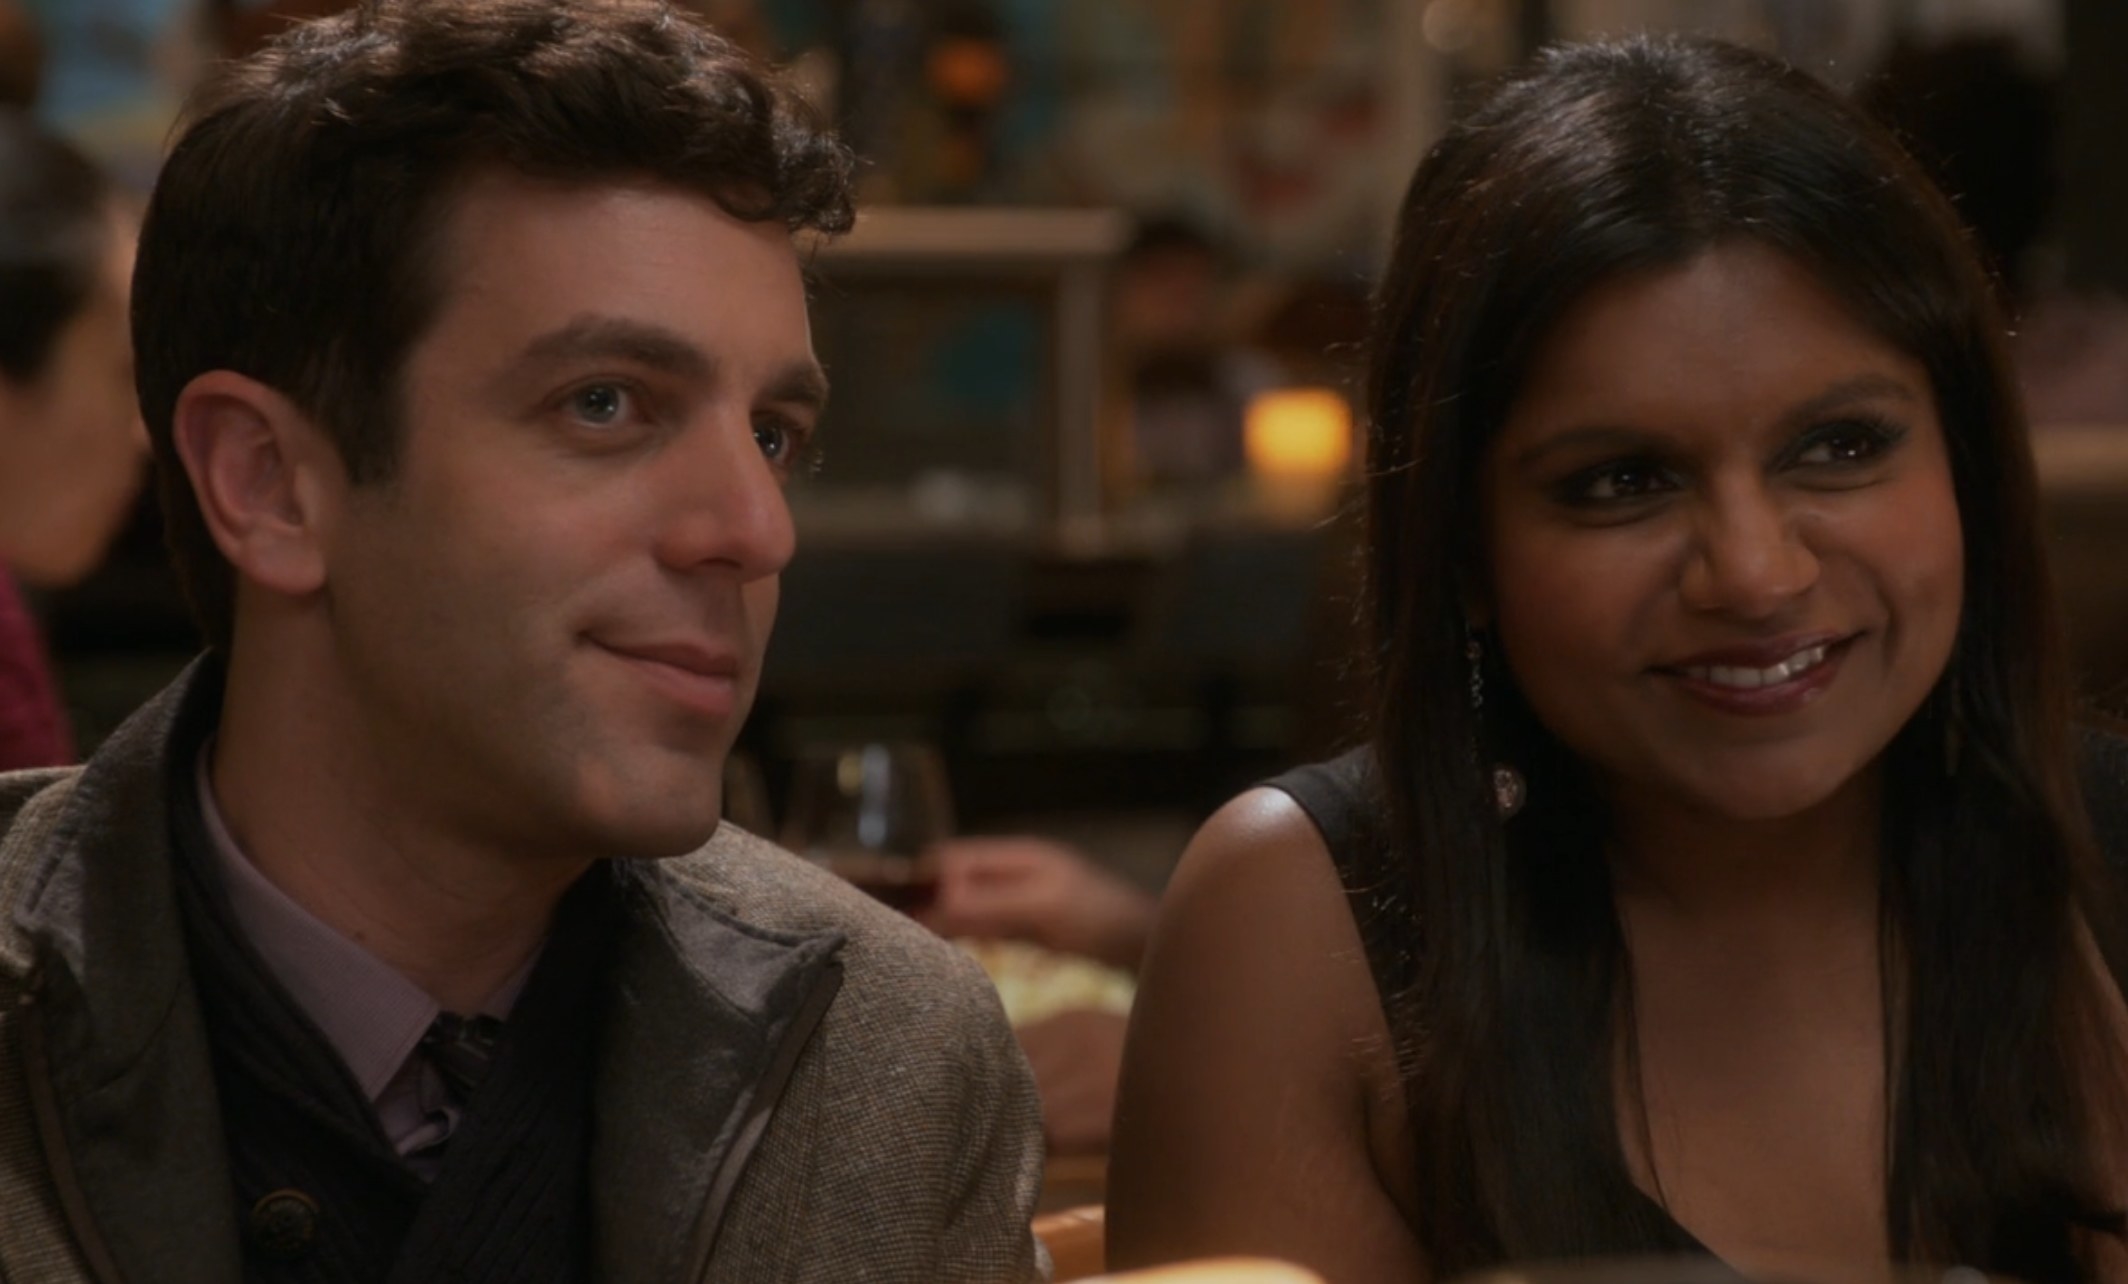 B.J. Novak as Jamie and Mindy smile during a double date in &quot;The Mindy Project&quot;